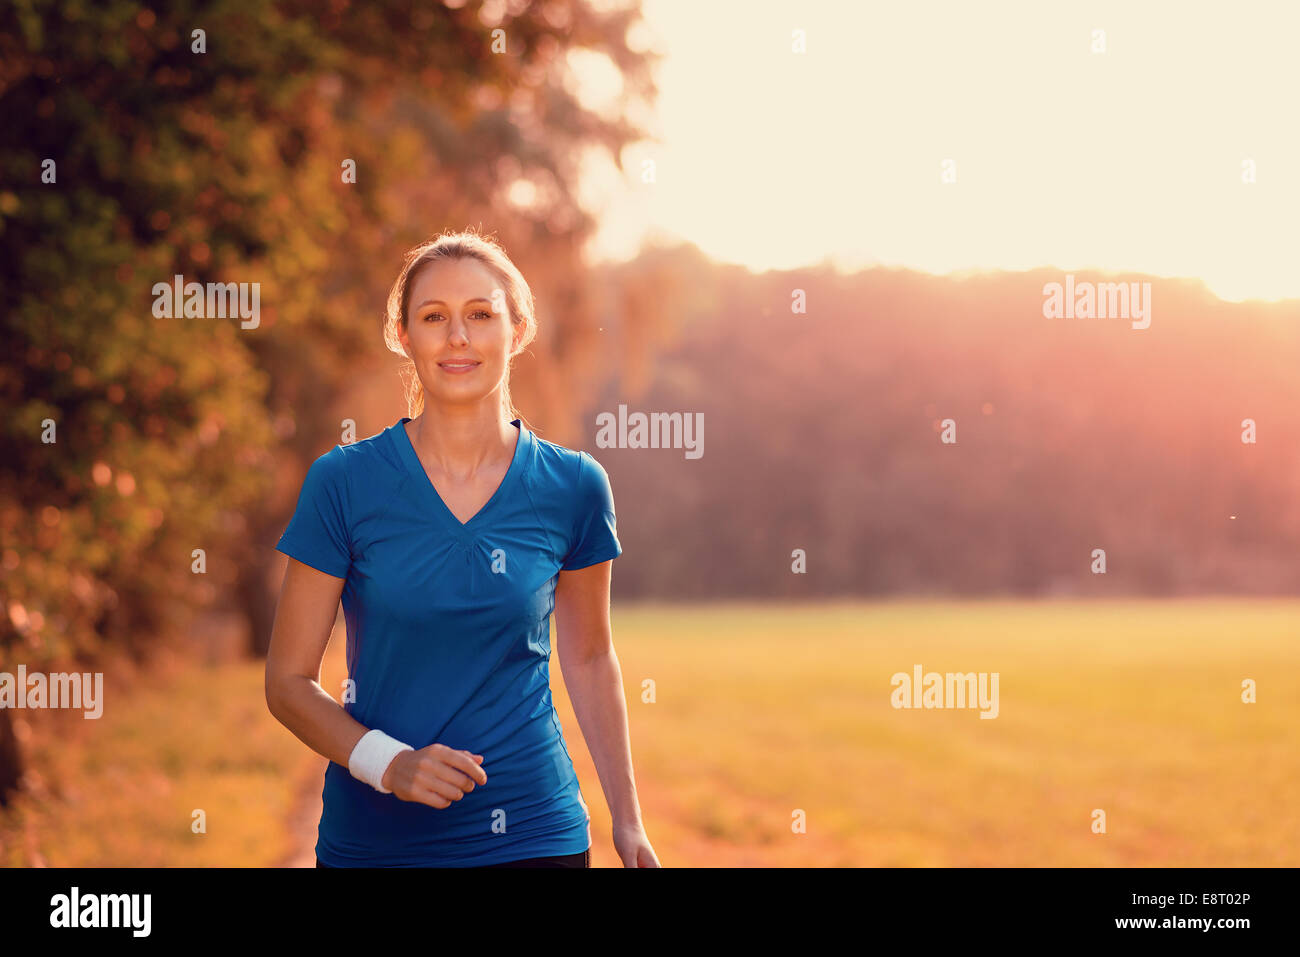 Attractive active young woman out exercising in glowing morning light on a country path through woodland and fields in a health, Stock Photo